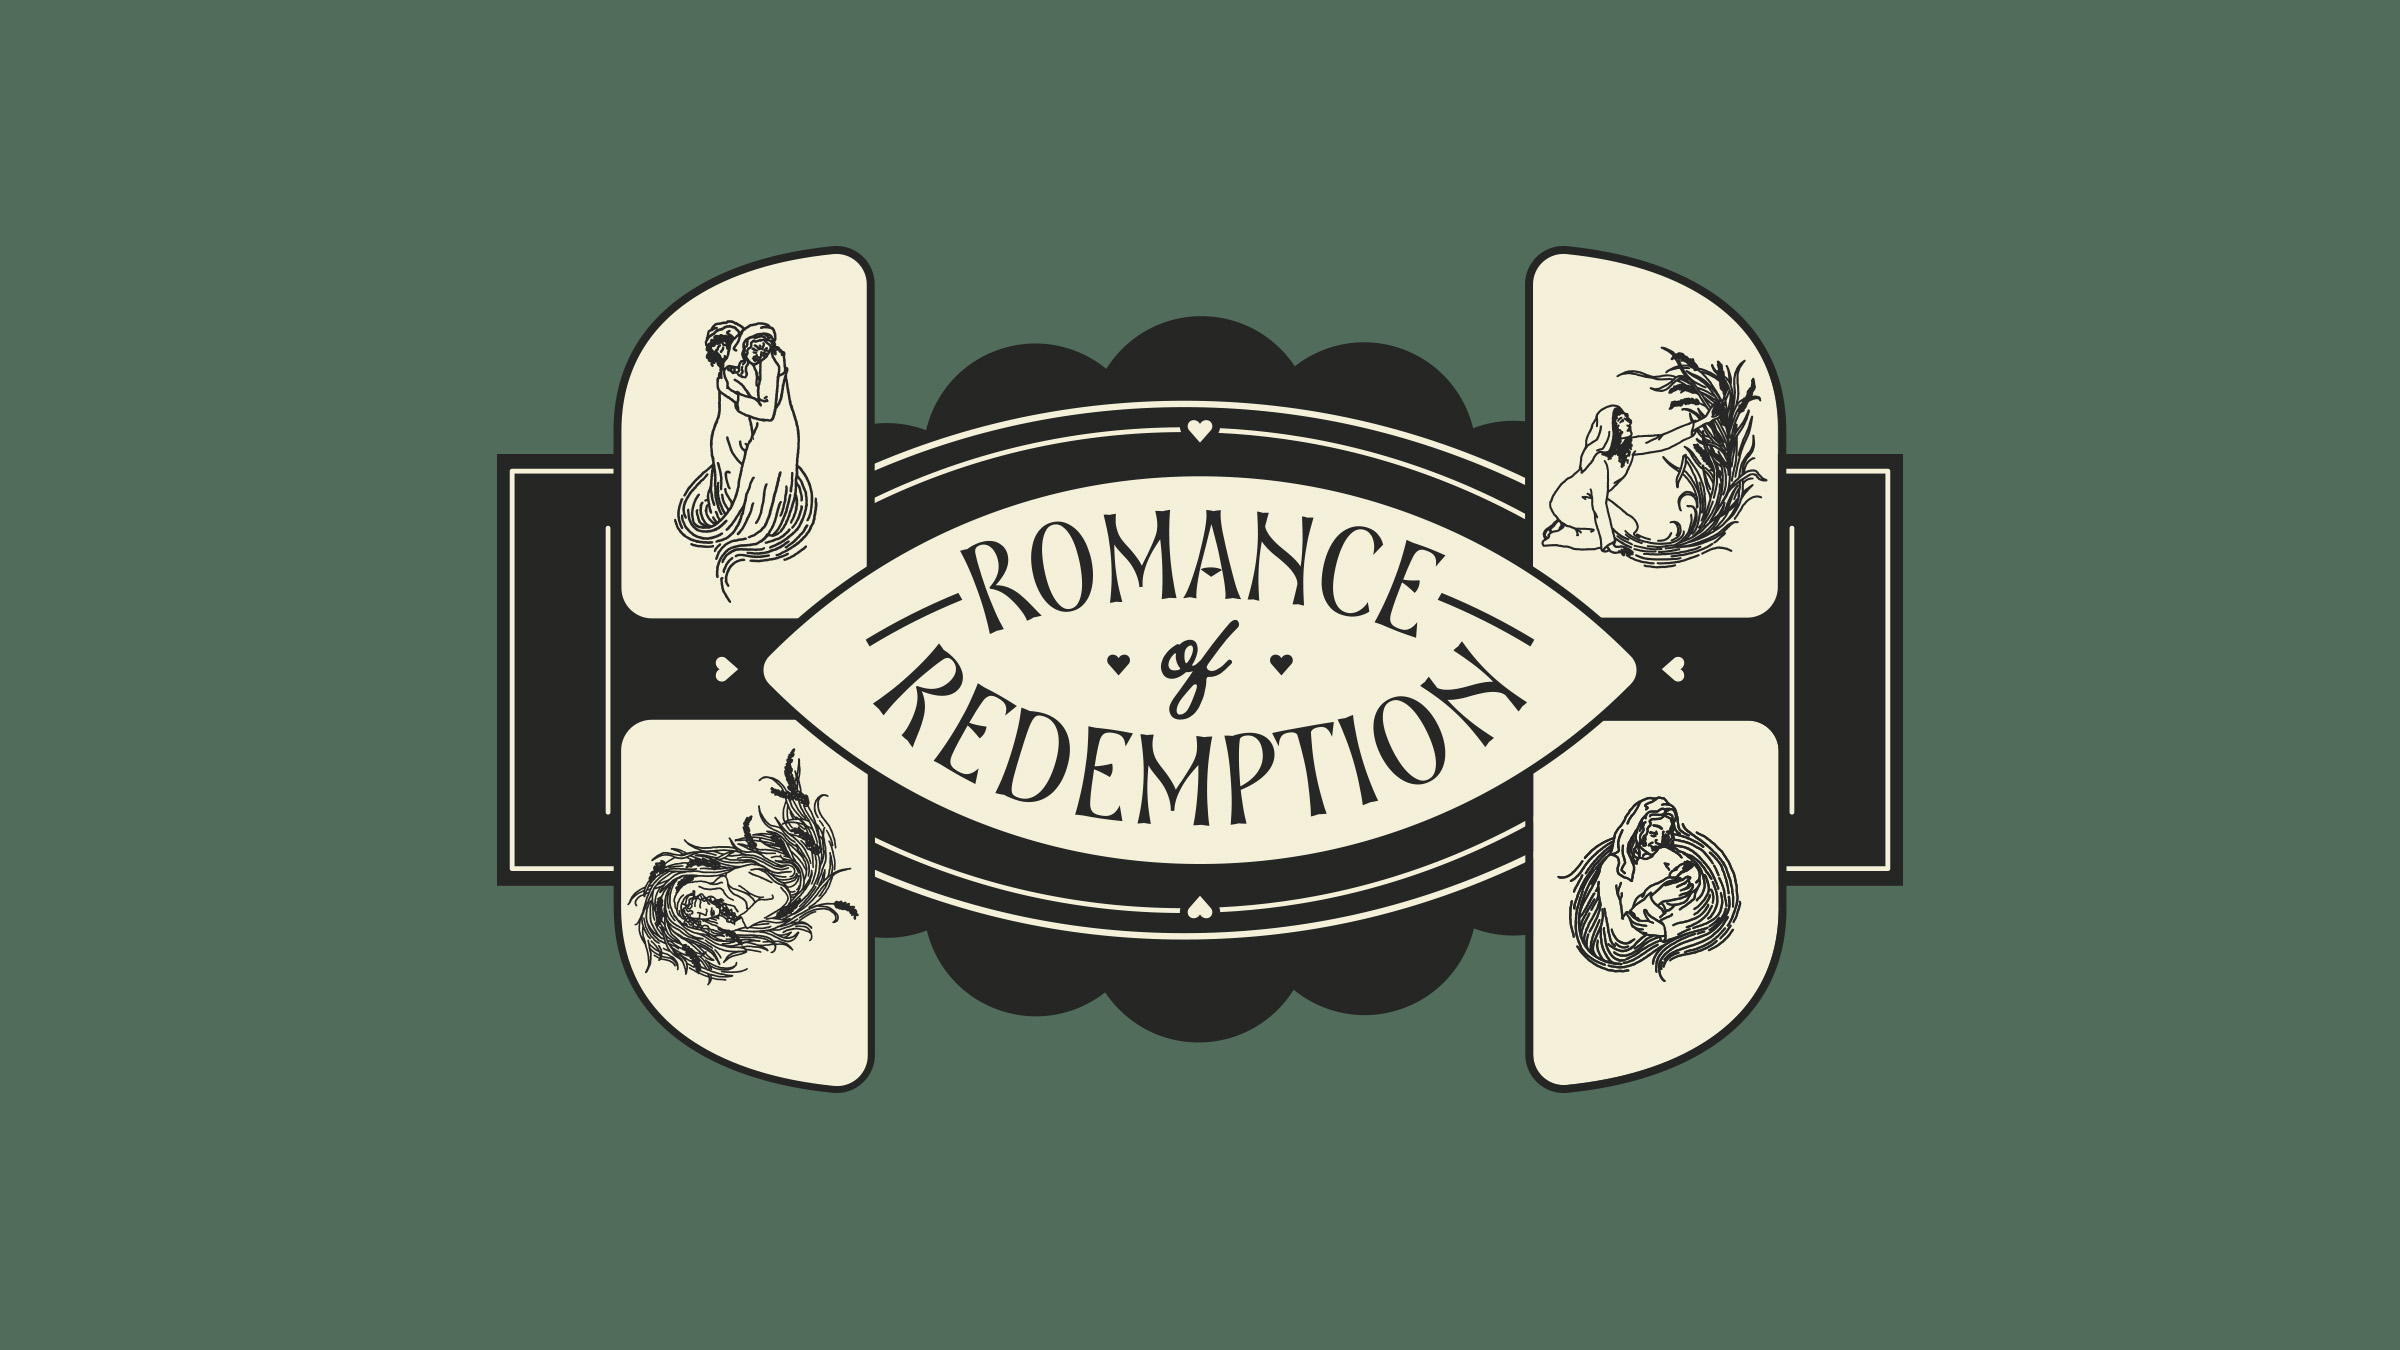 Sheologie Series: Romance of Redemption